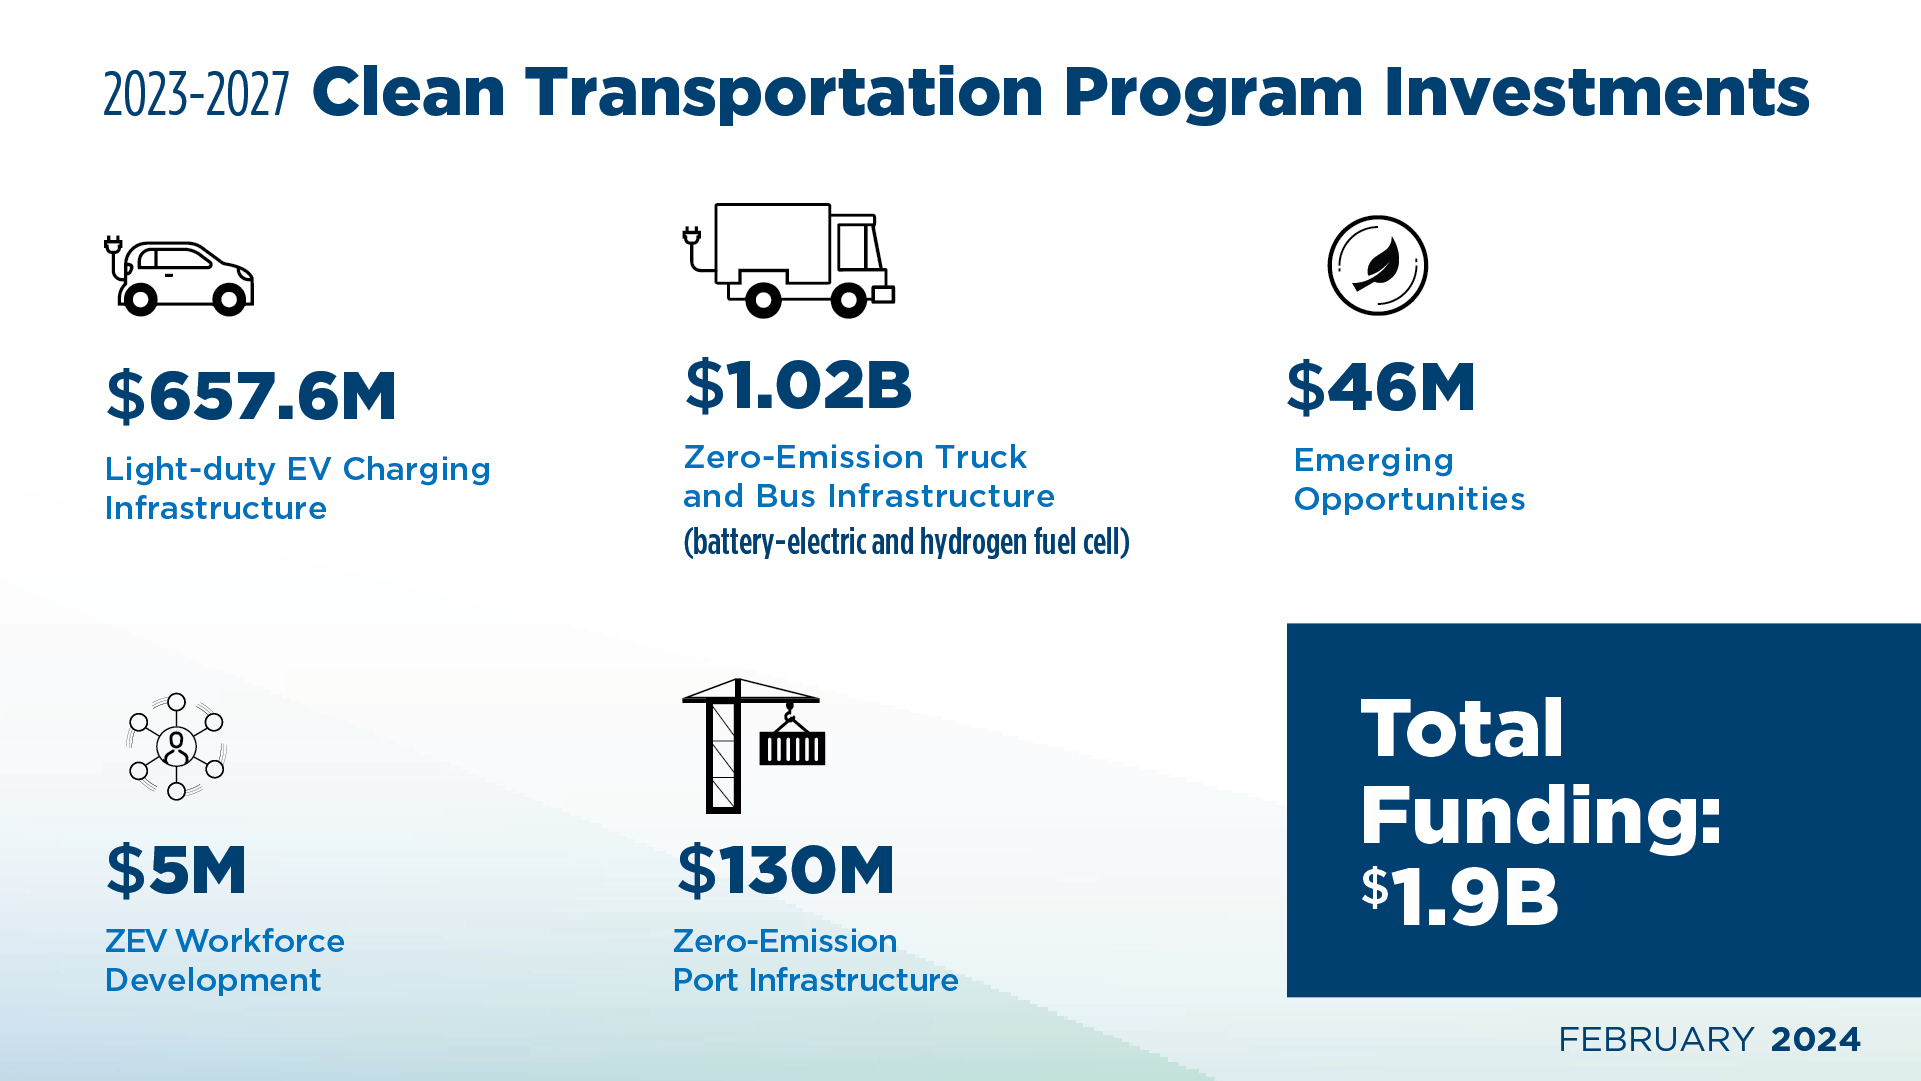 Graphic displaying 2023 to 2027 Clean Transportation Program Investments.